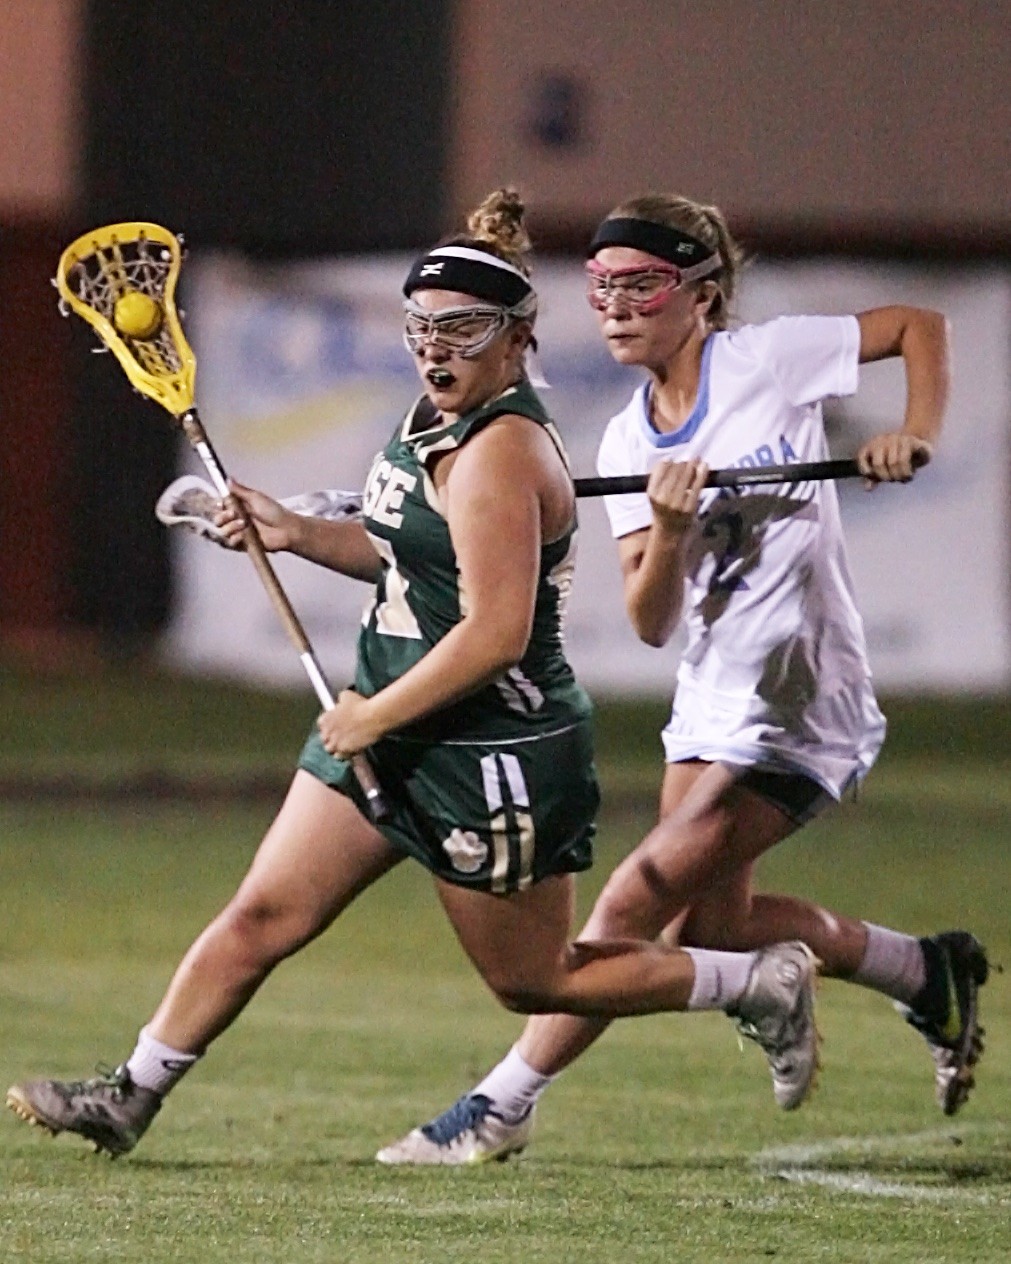 #2 Carleigh Cates of the Sharks defends against the Panther attacker.